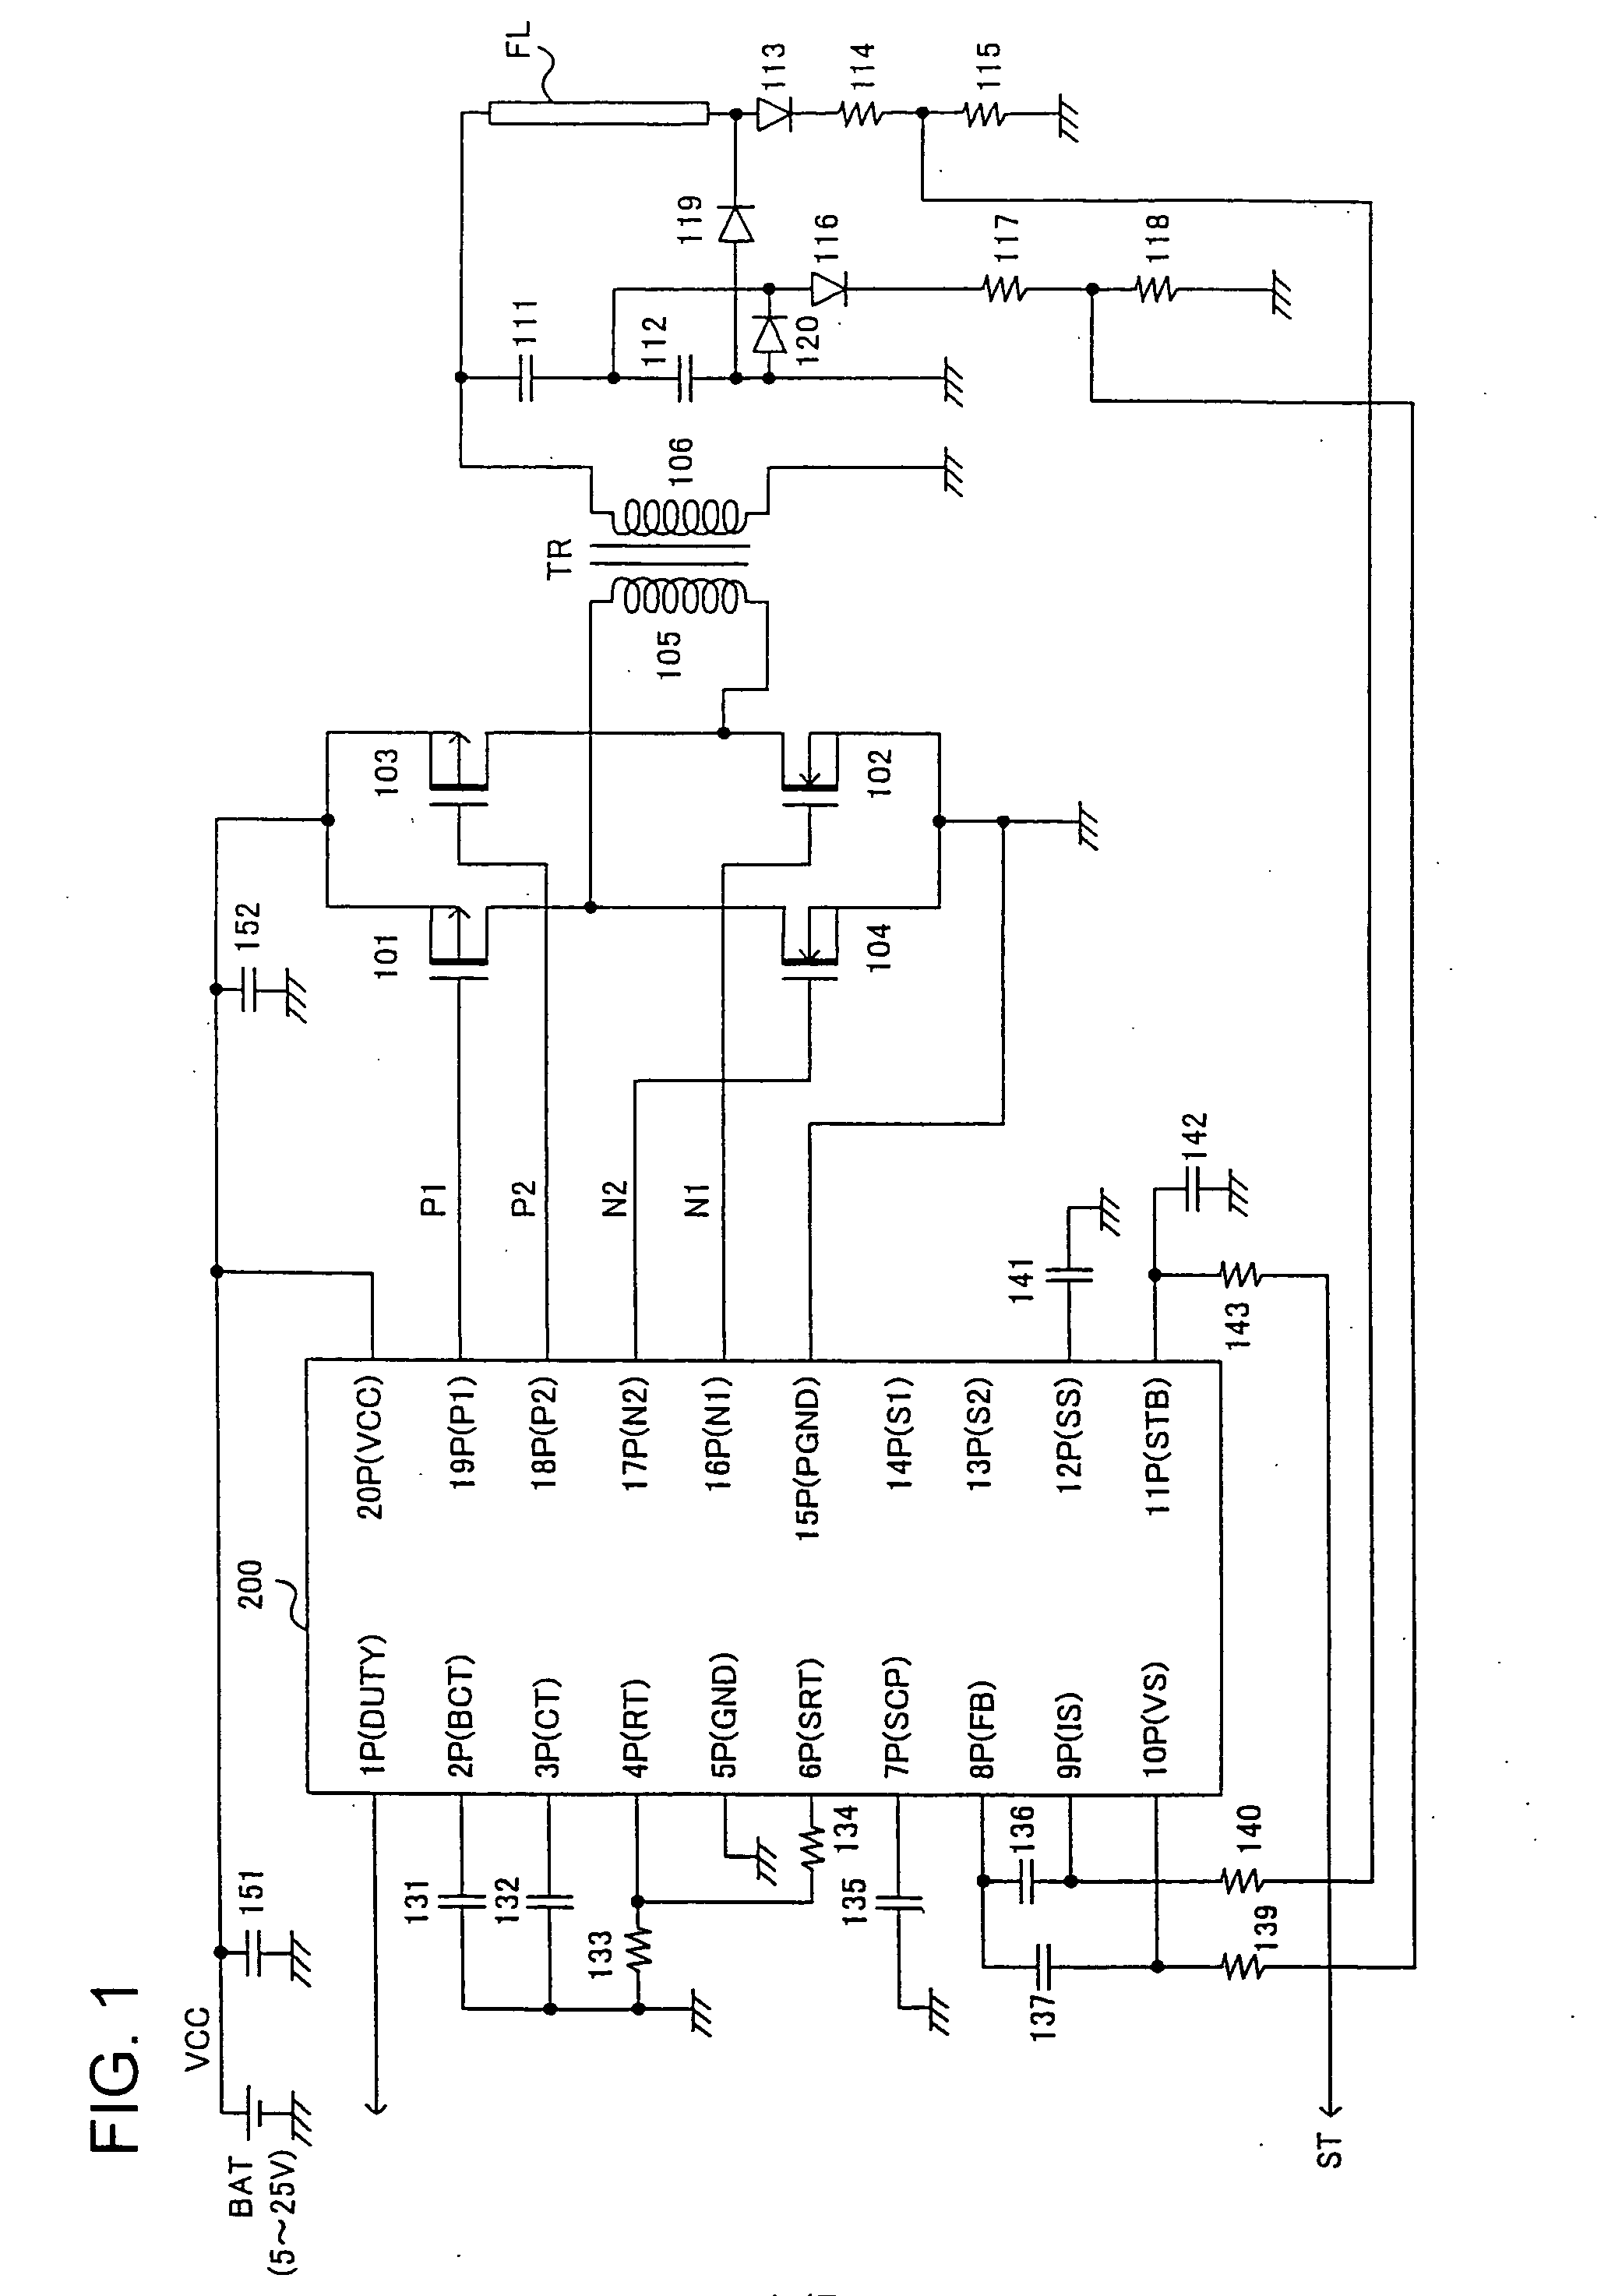 Dc/ac converter and controller ic